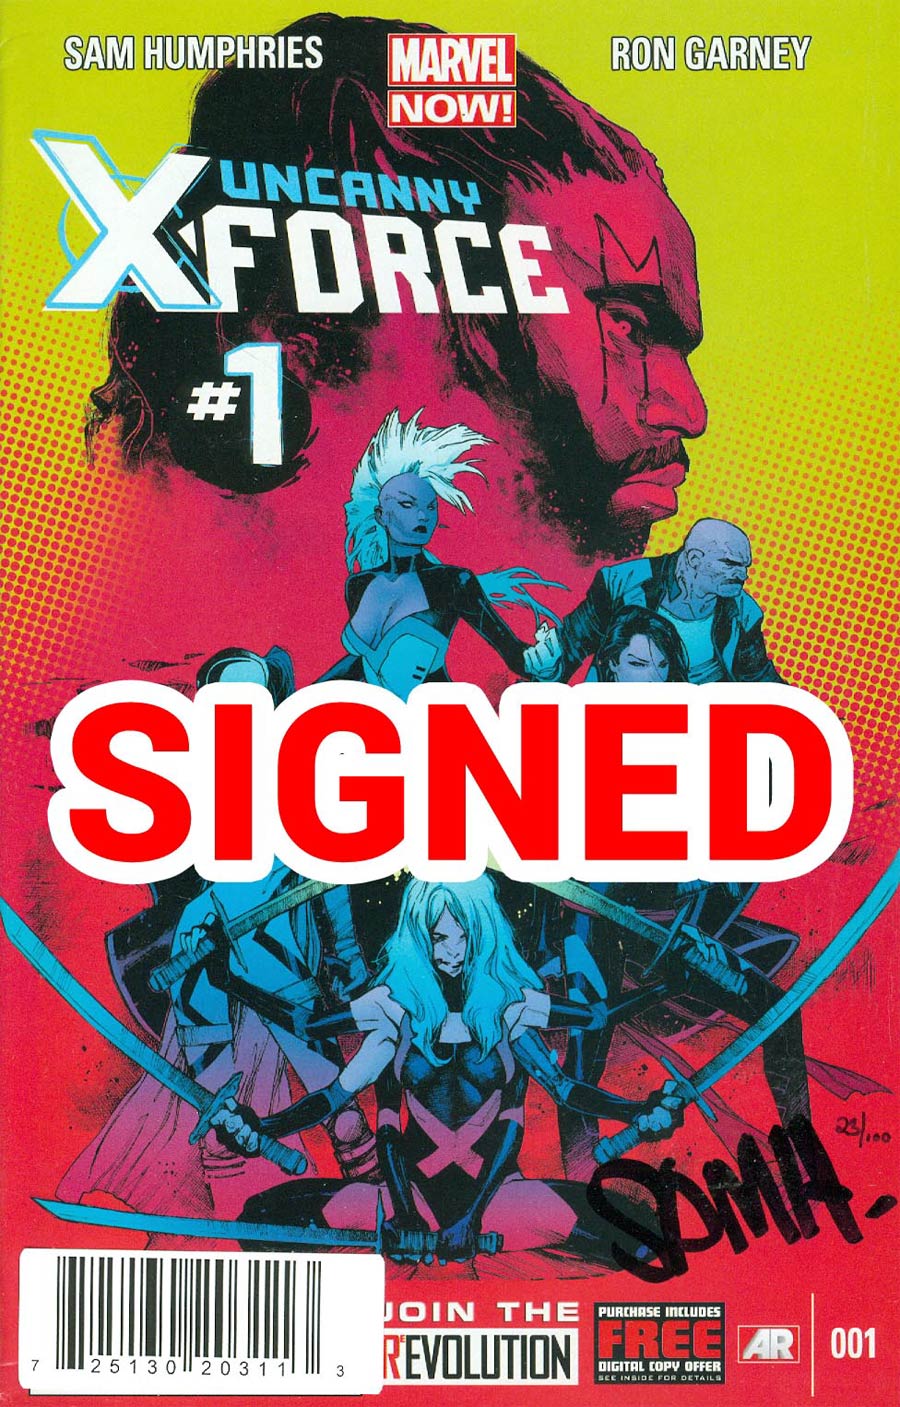 Uncanny X-Force Vol 2 #1 Cover F DF Signed By Sam Humphries